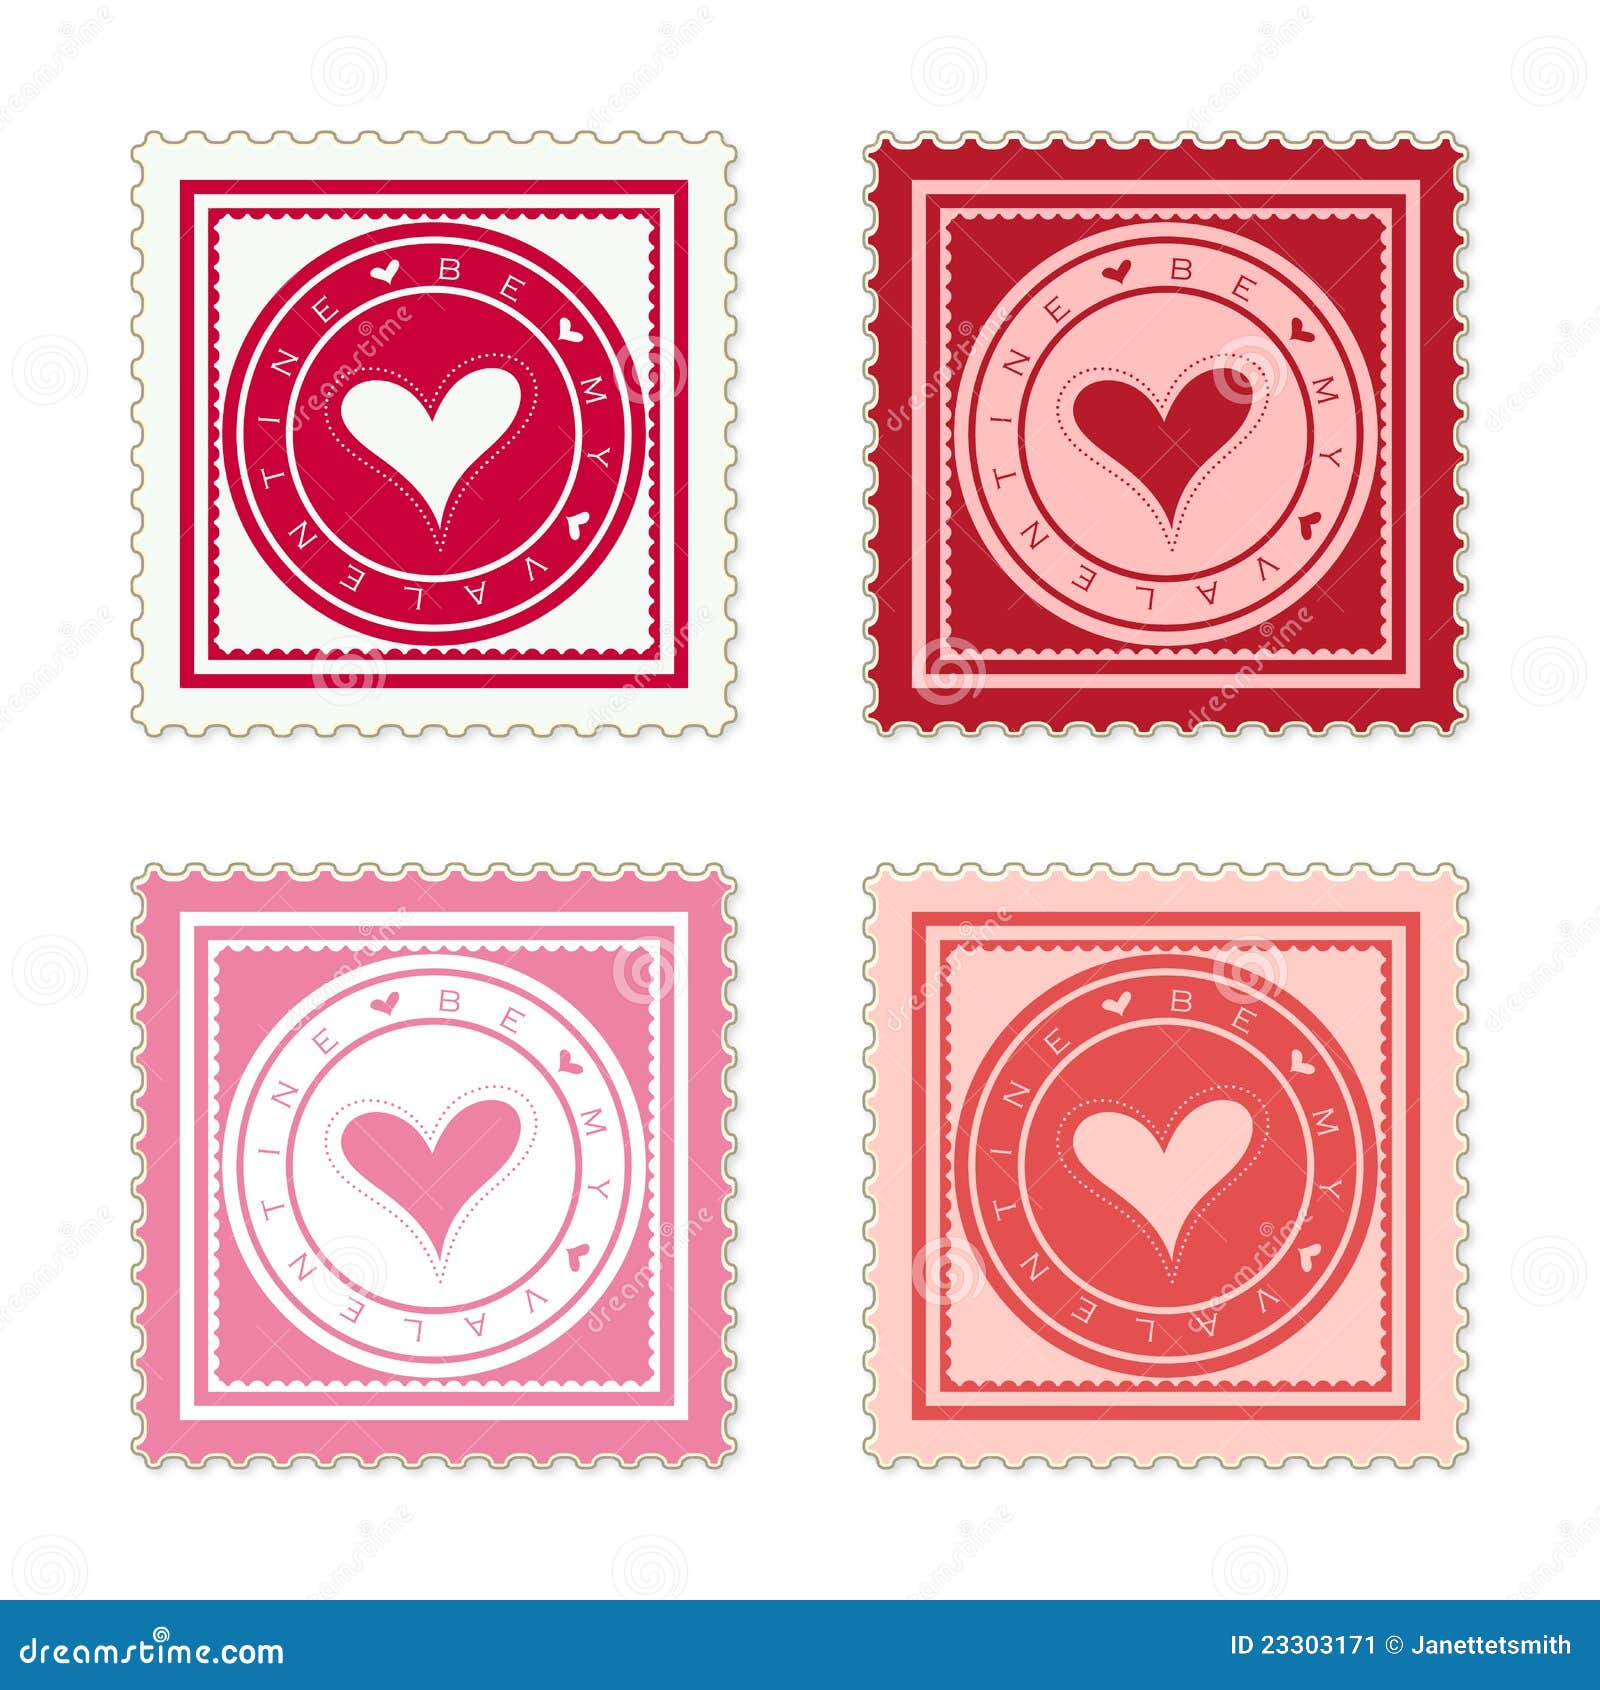 be my valentine scalable stamps